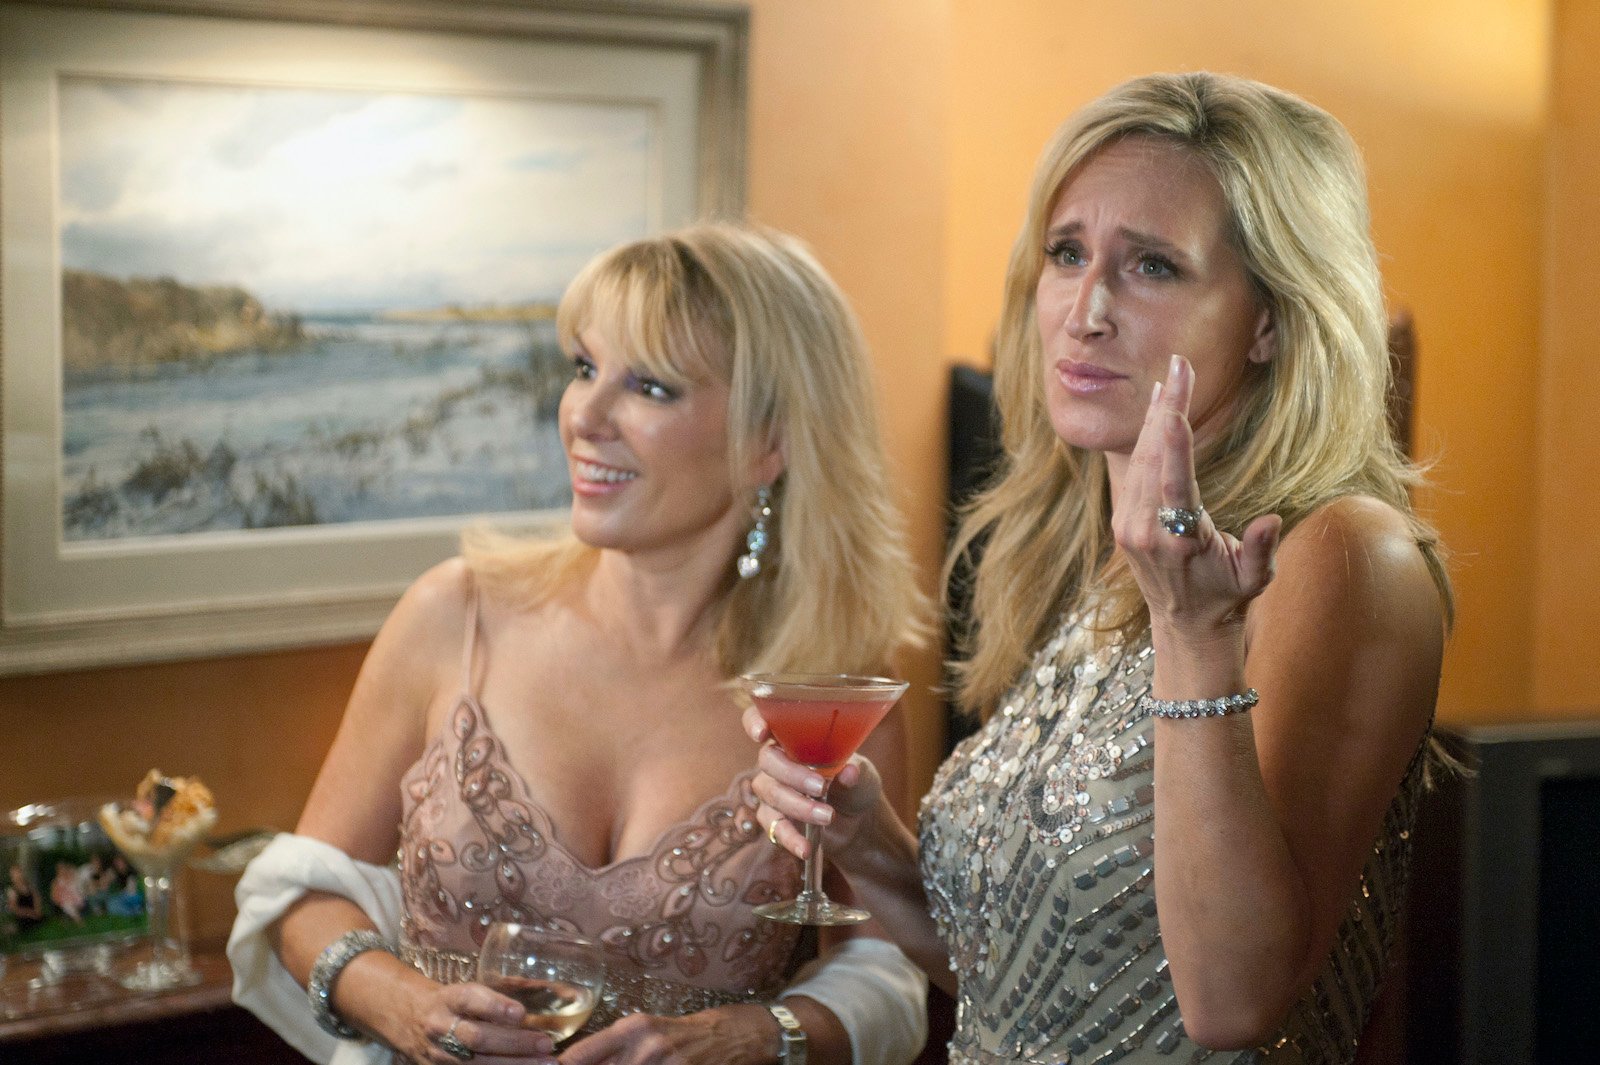 Ramona Singer and Sonja Morgan from 'RHONY' at a cocktail party